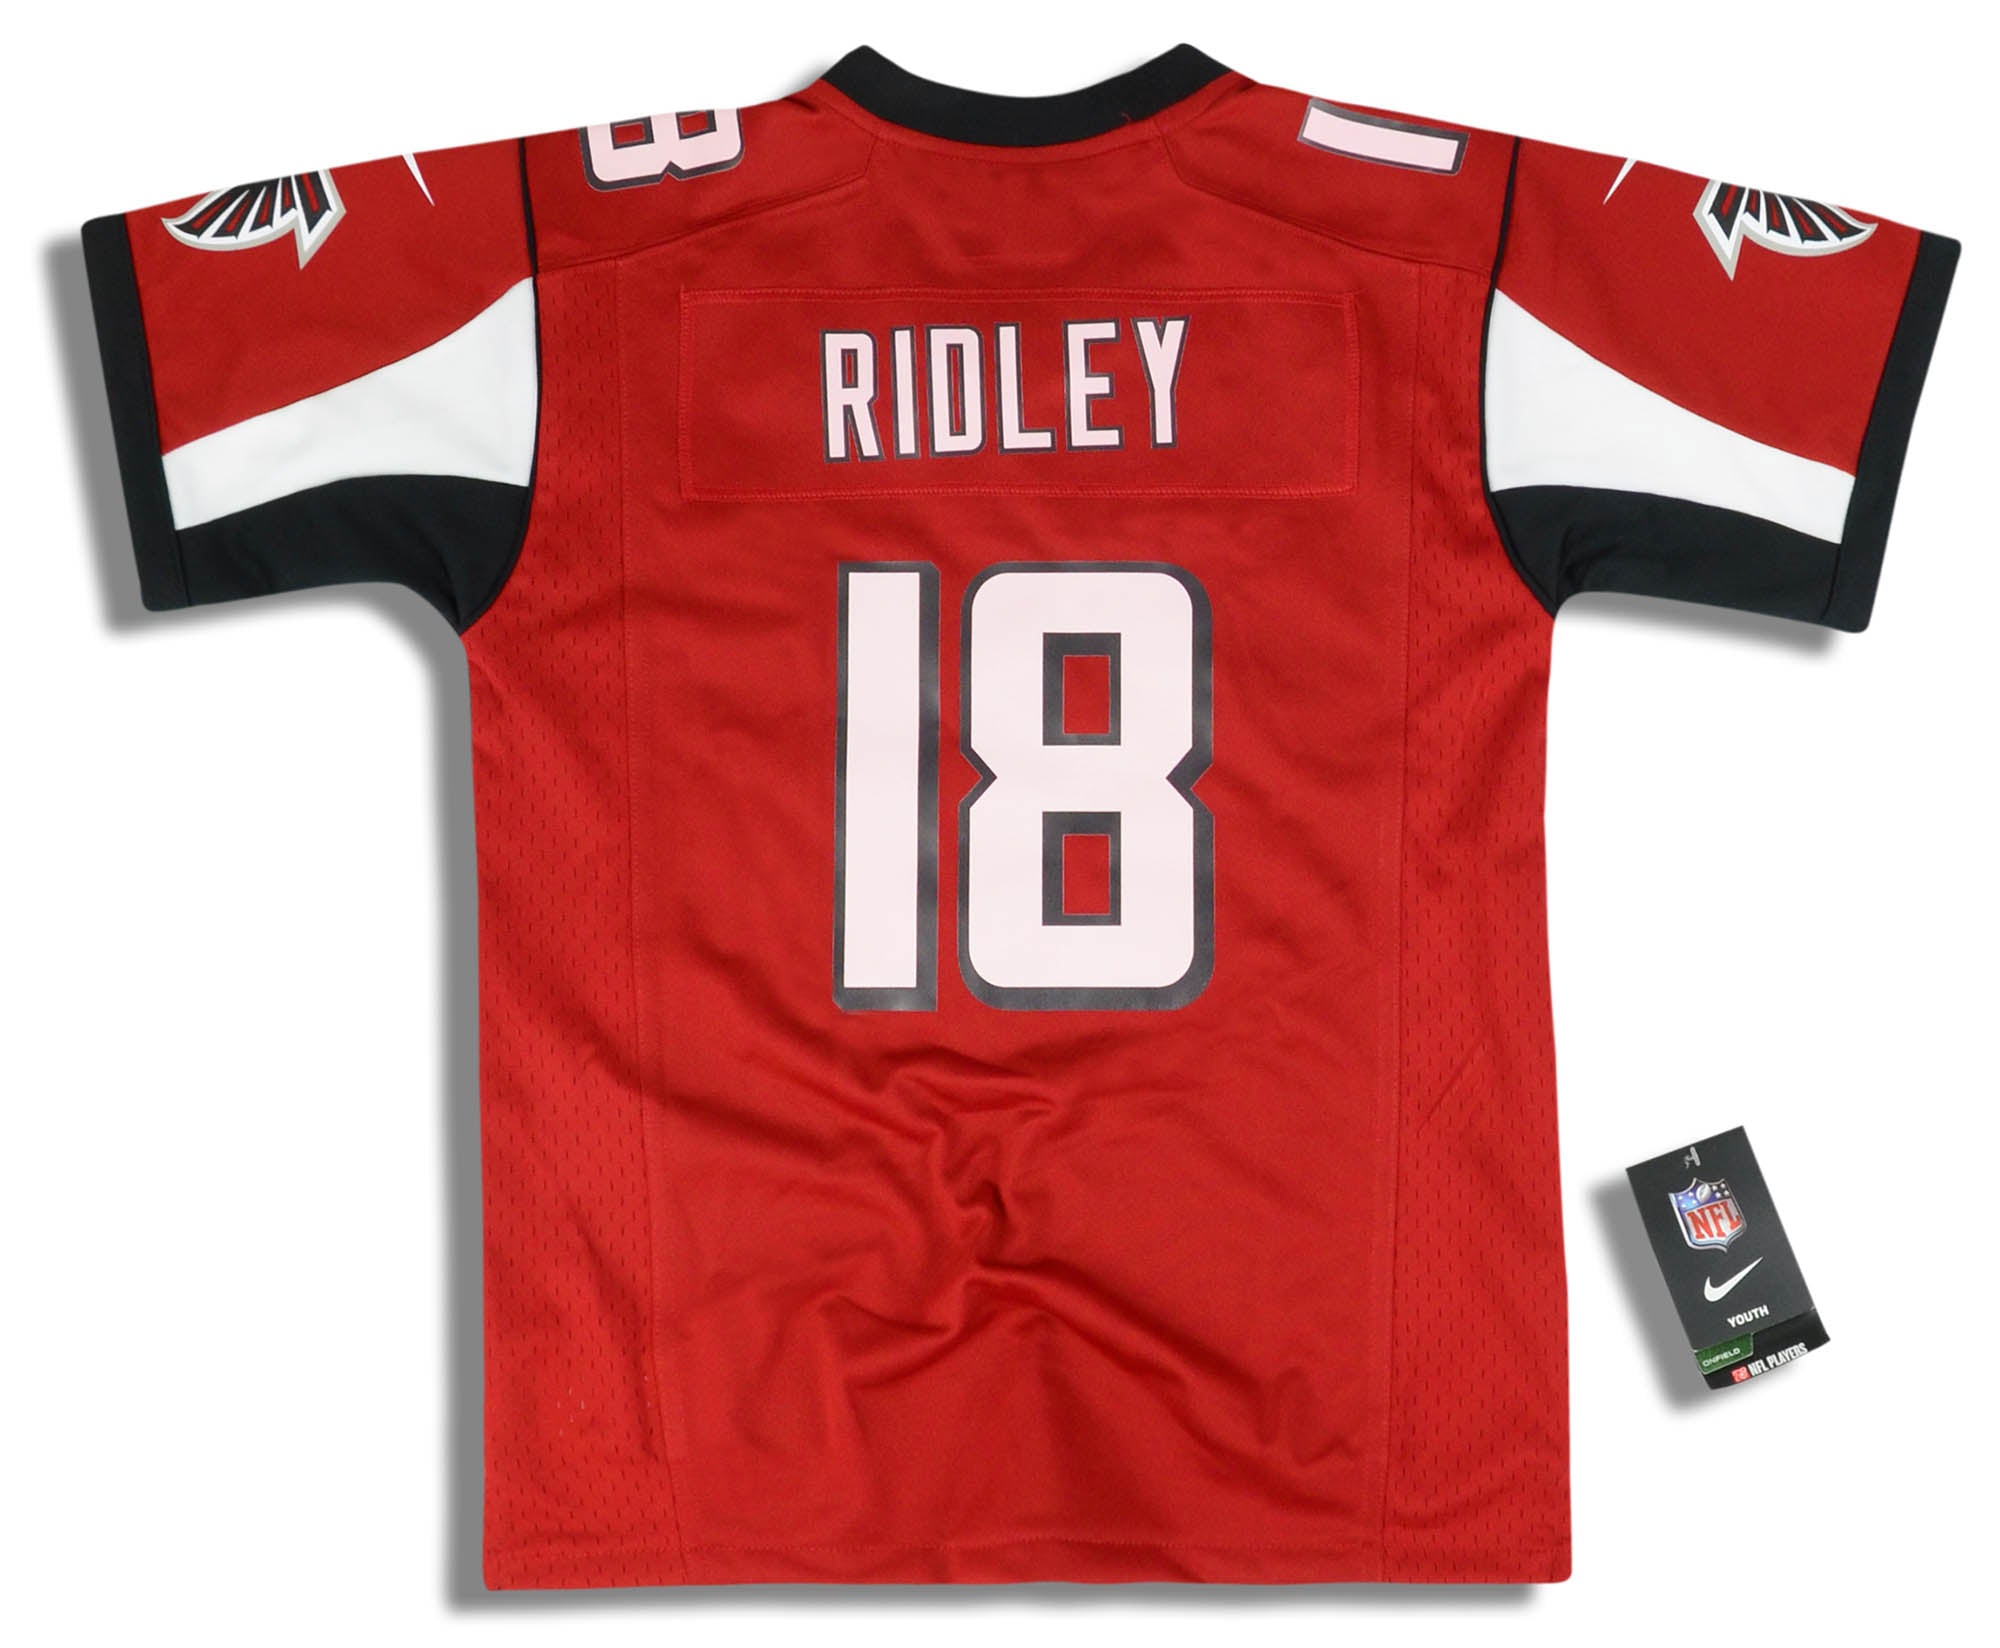 2018 ATLANTA FALCONS RIDLEY #18 NIKE GAME JERSEY (HOME) Y - W/TAGS